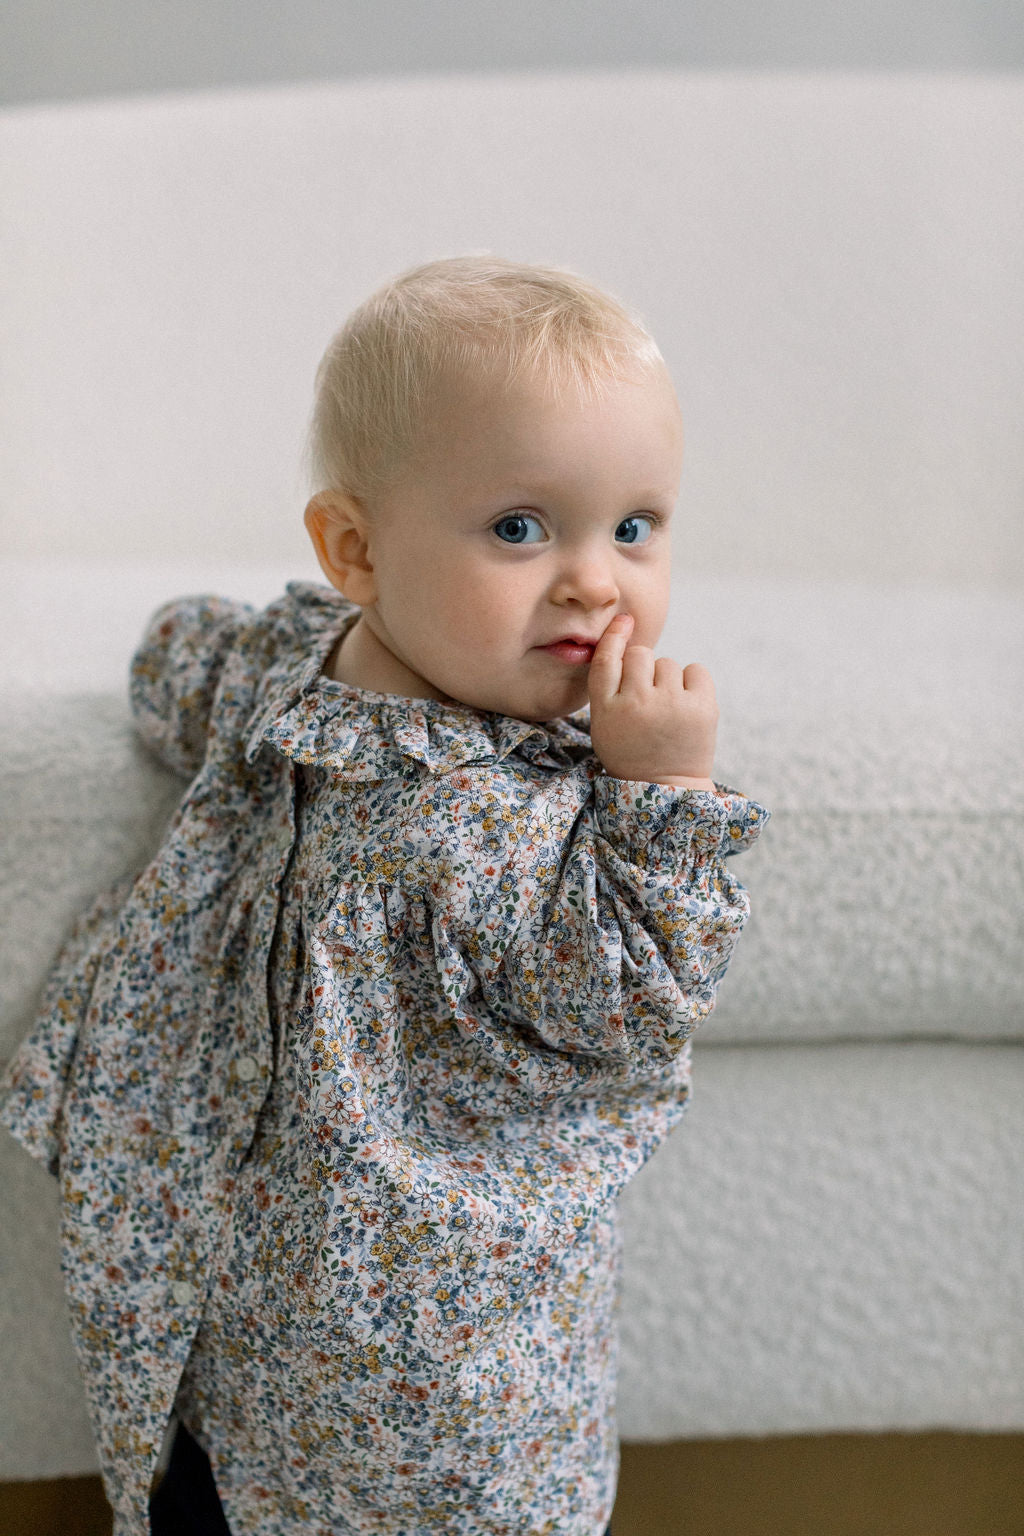 Floral baby blouse